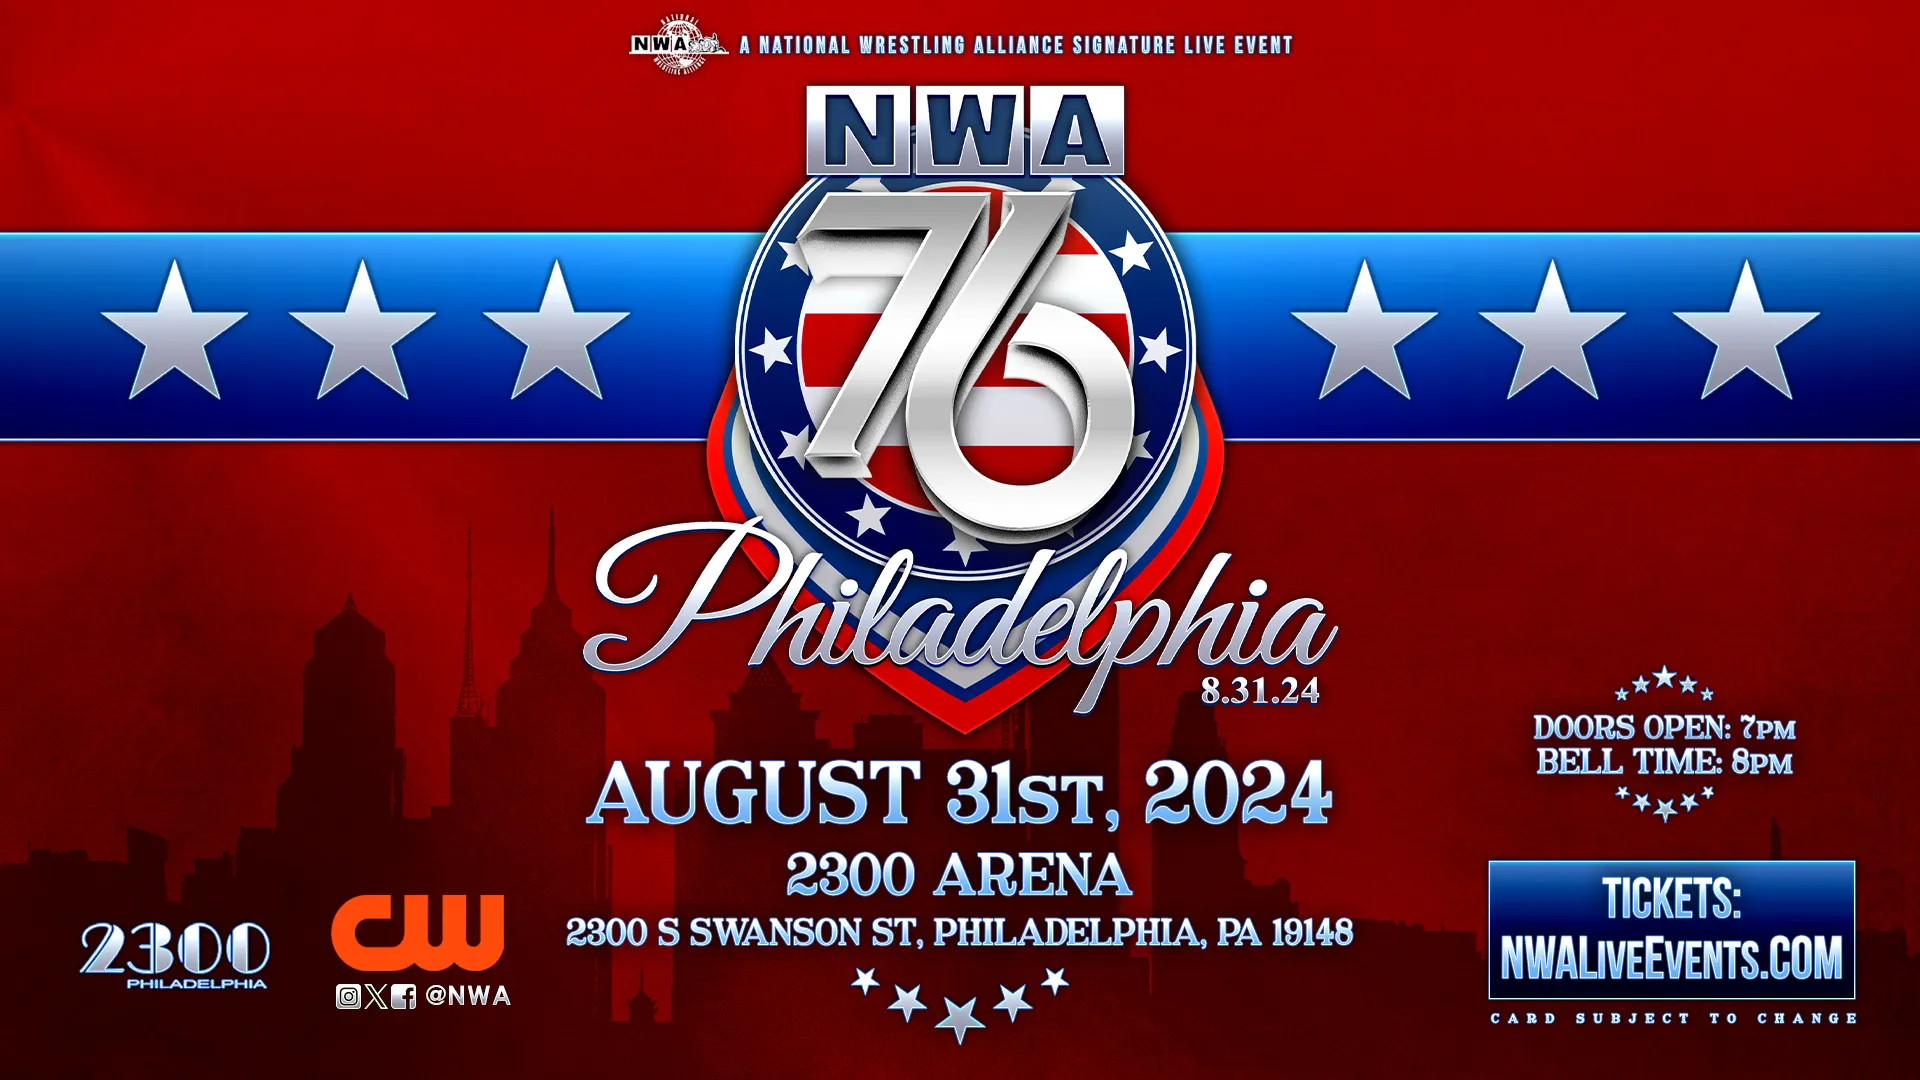 First Match Announced For NWA 76